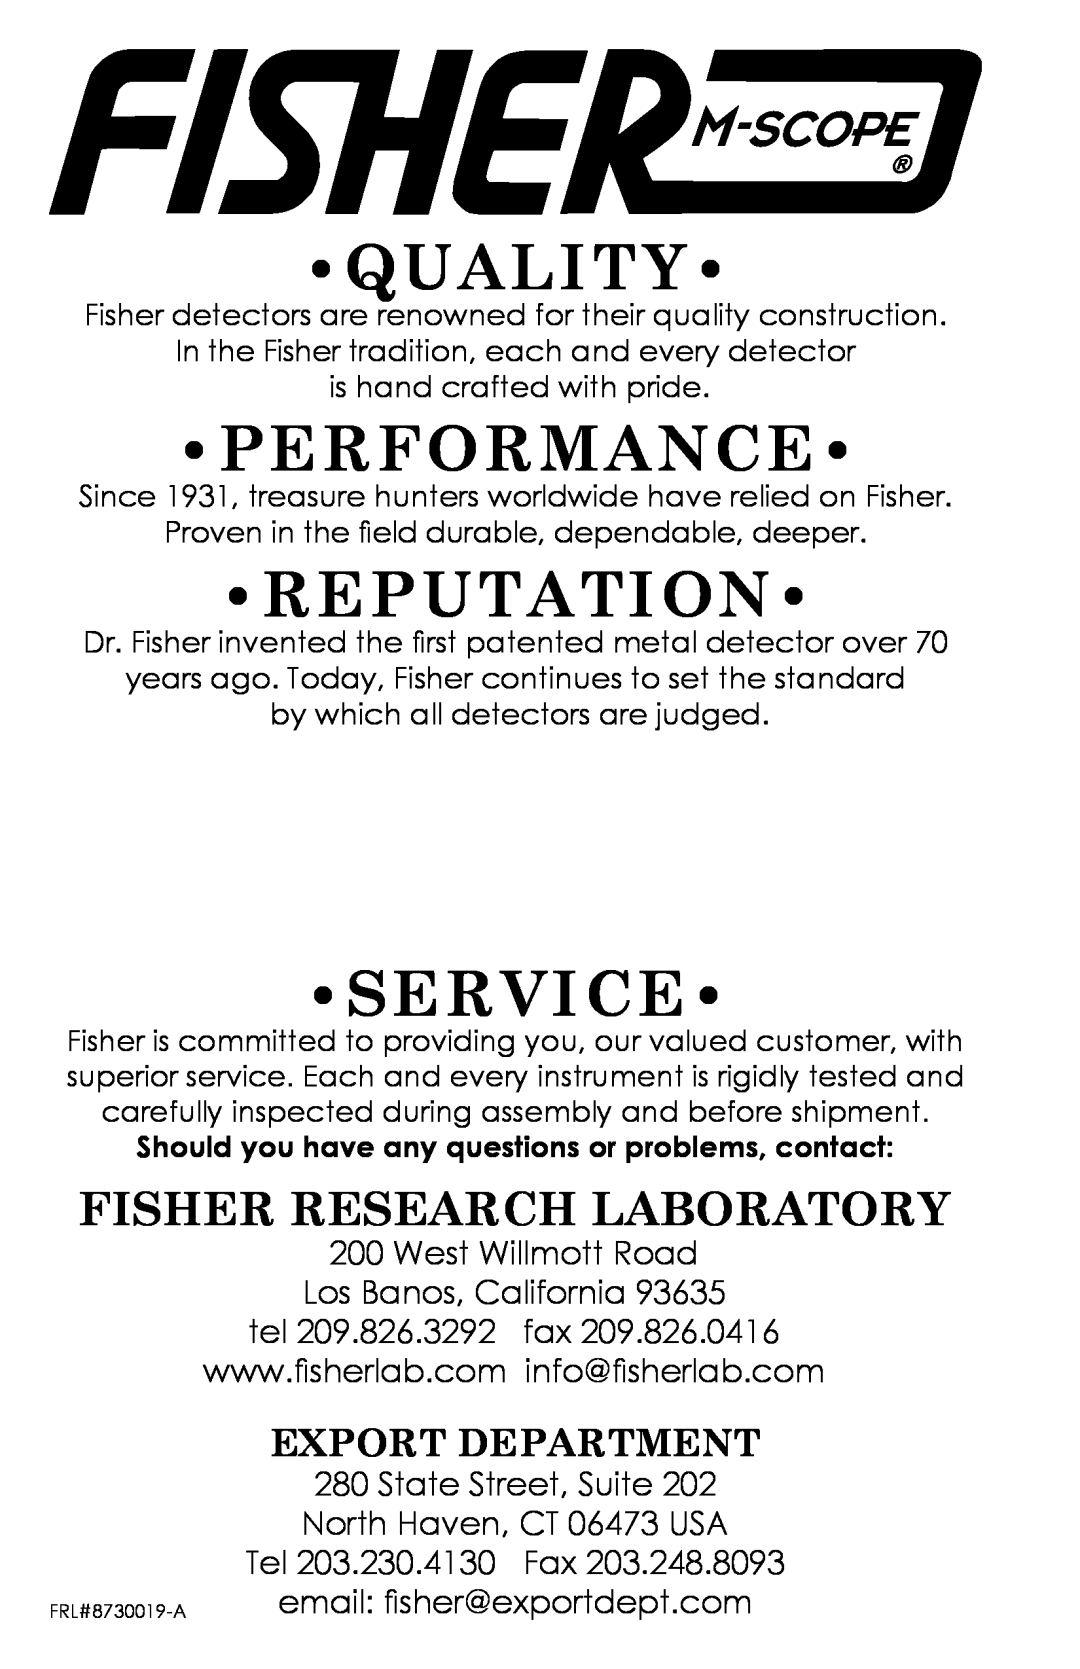 Fisher CZ-3D Export Department, Quality, Performance, Reputation, Lifetime Warranty, Service, Fisher Research Laboratory 